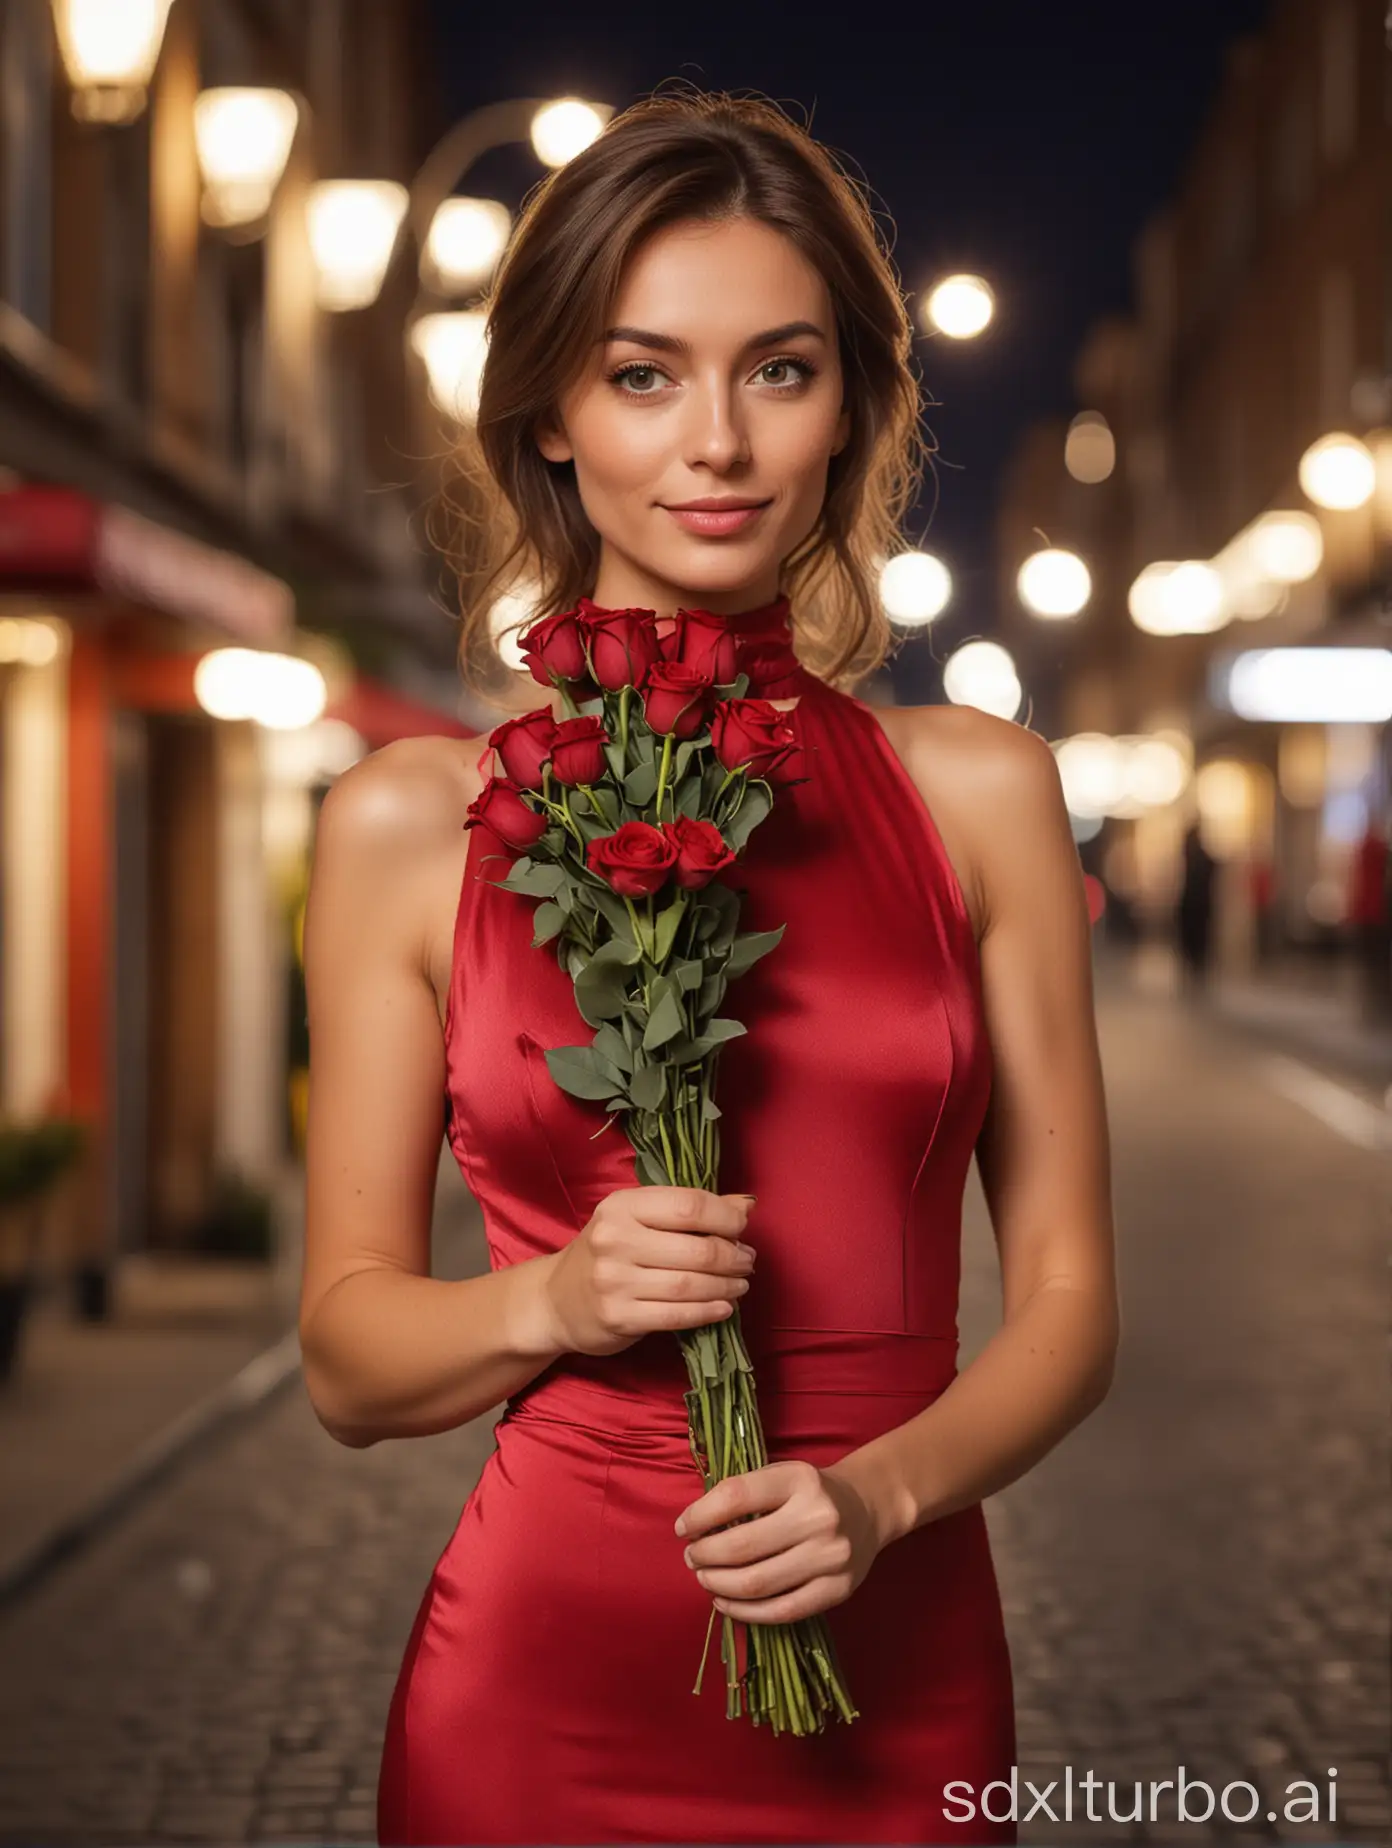 medium brown hair woman, slim body, small breast, wearing red silk turtleneck sleeveless evening gown, eyes full of love, holding bouquet of flowers, background is a street blurred, bokeh, at night